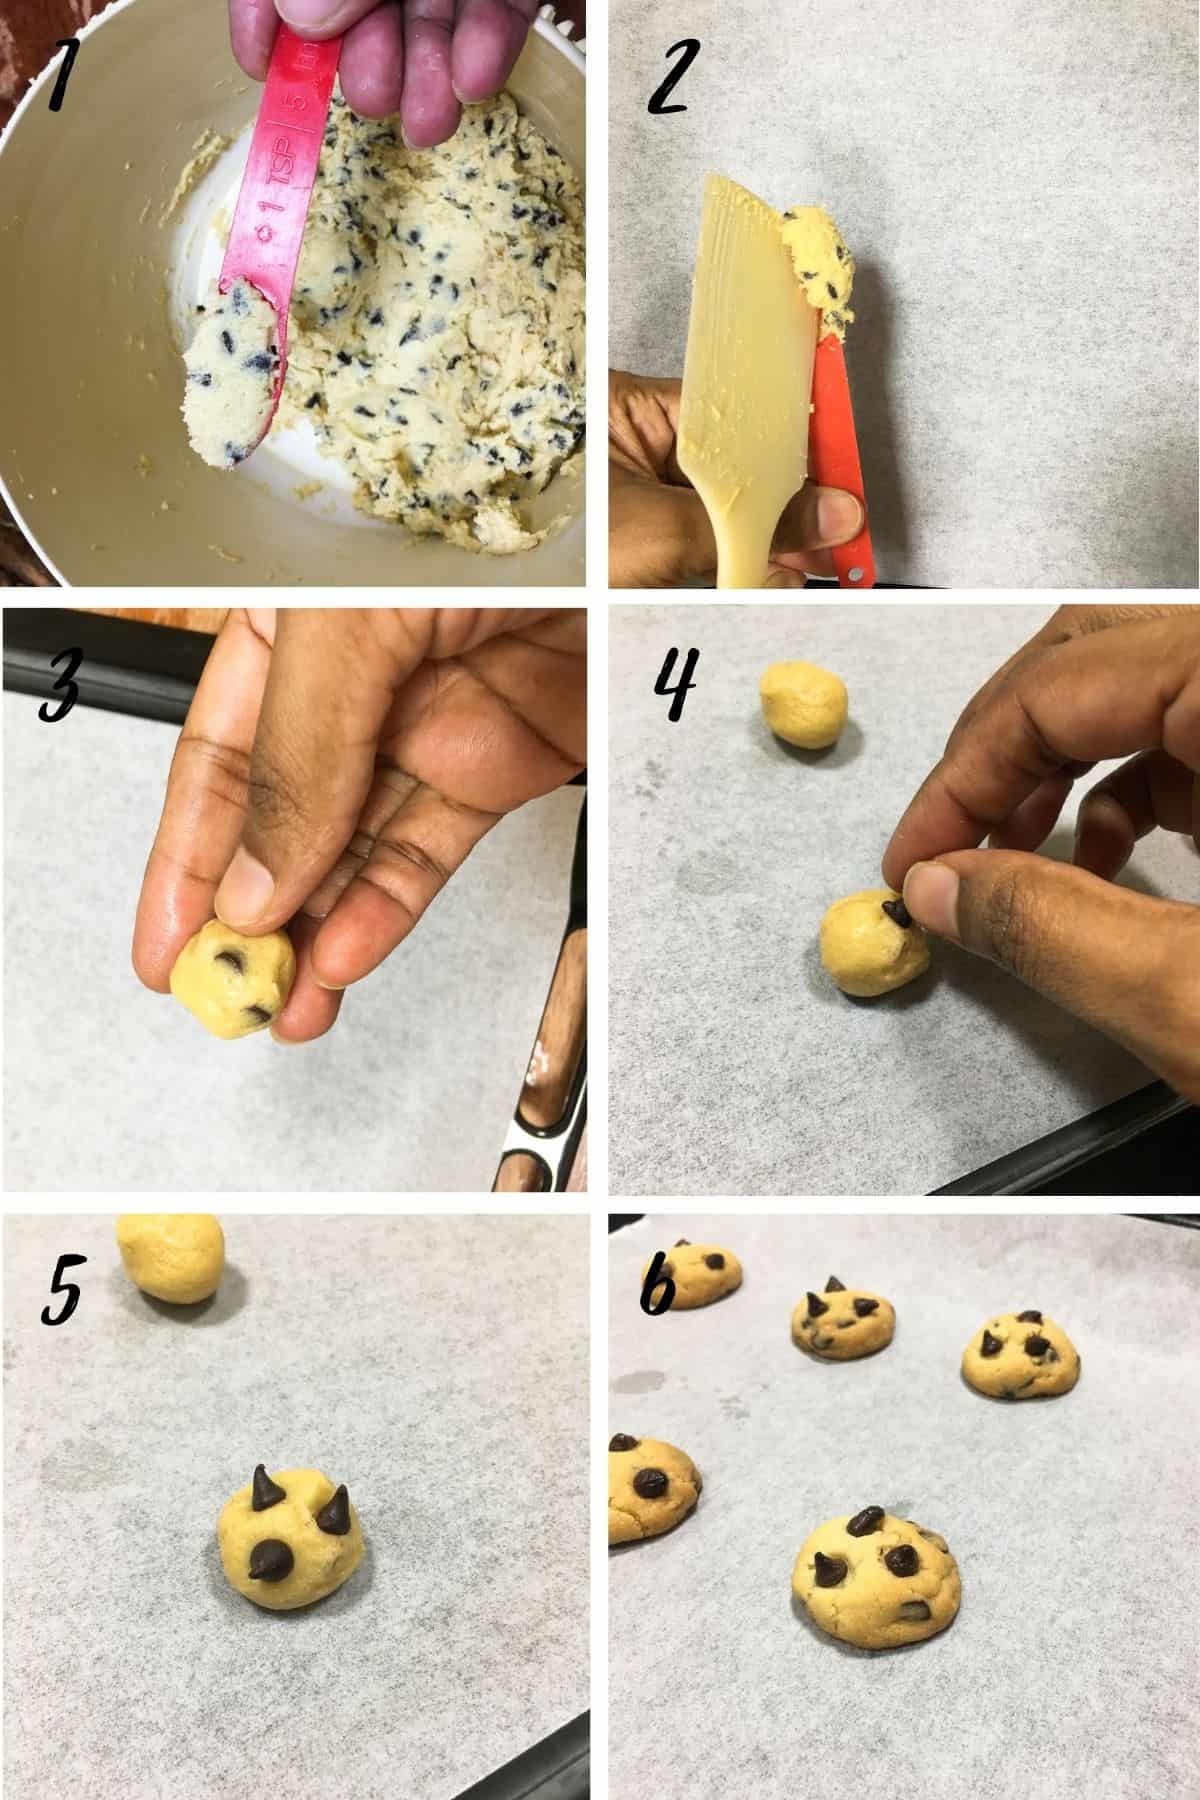 A poster of 6 images showing how to from mini chocolate chip cookies with a ½ teaspoon measuring spoon, how to shape the dough into a ball, how to add chocolate chips, how to space out on the baking tray and a baked cookie.